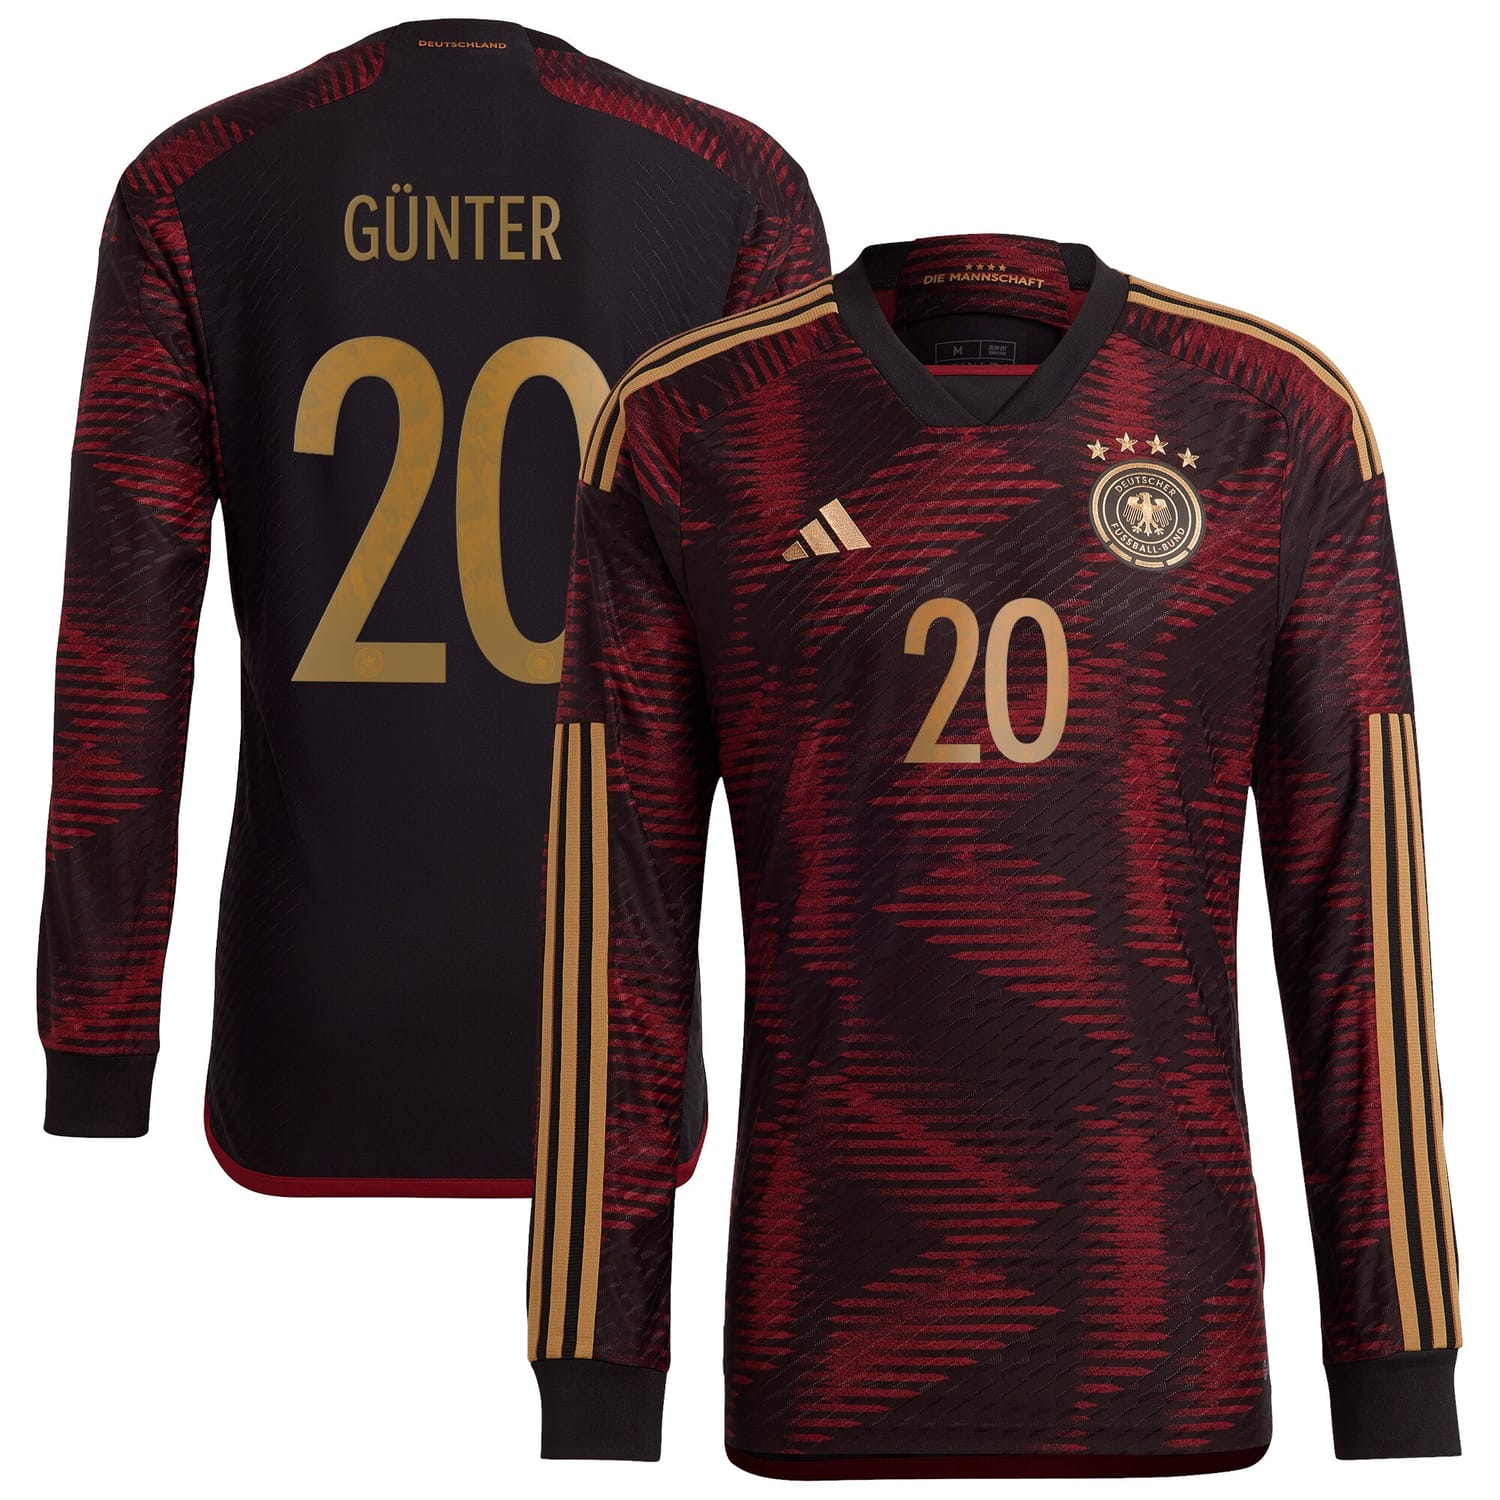 Germany National Team Away Authentic Jersey Shirt Long Sleeve 2022 player Christian Günter 20 printing for Men